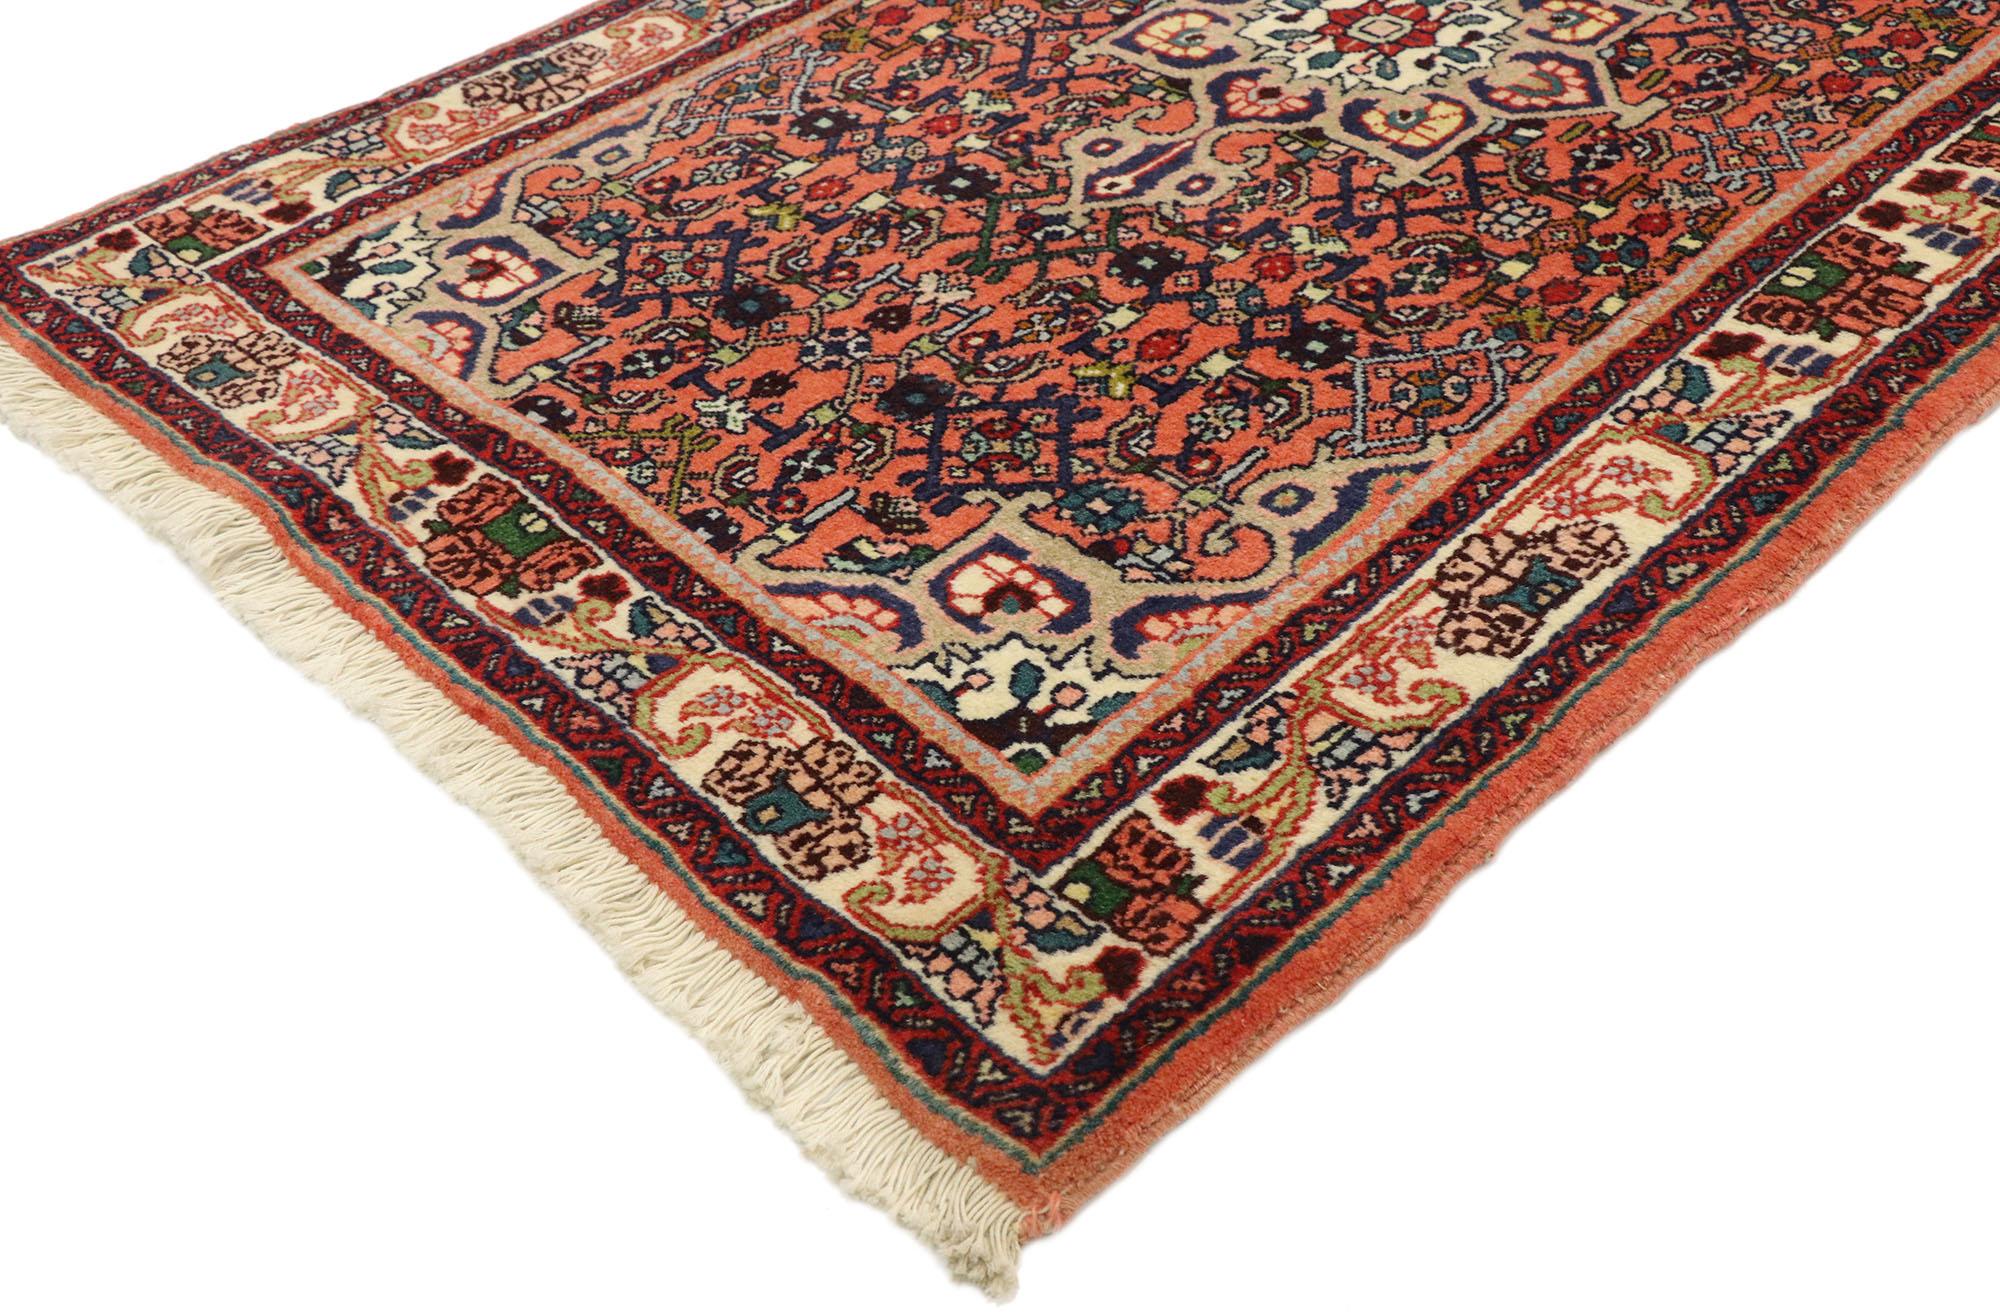 76056 Vintage Persian Bijar Rug, 02'06 x 04'00. Crafted with meticulous care and timeless artistry, this hand-knotted wool Persian Bijar rug boasts a round floral medallion as its centerpiece, exuding a sense of understated elegance and grace.